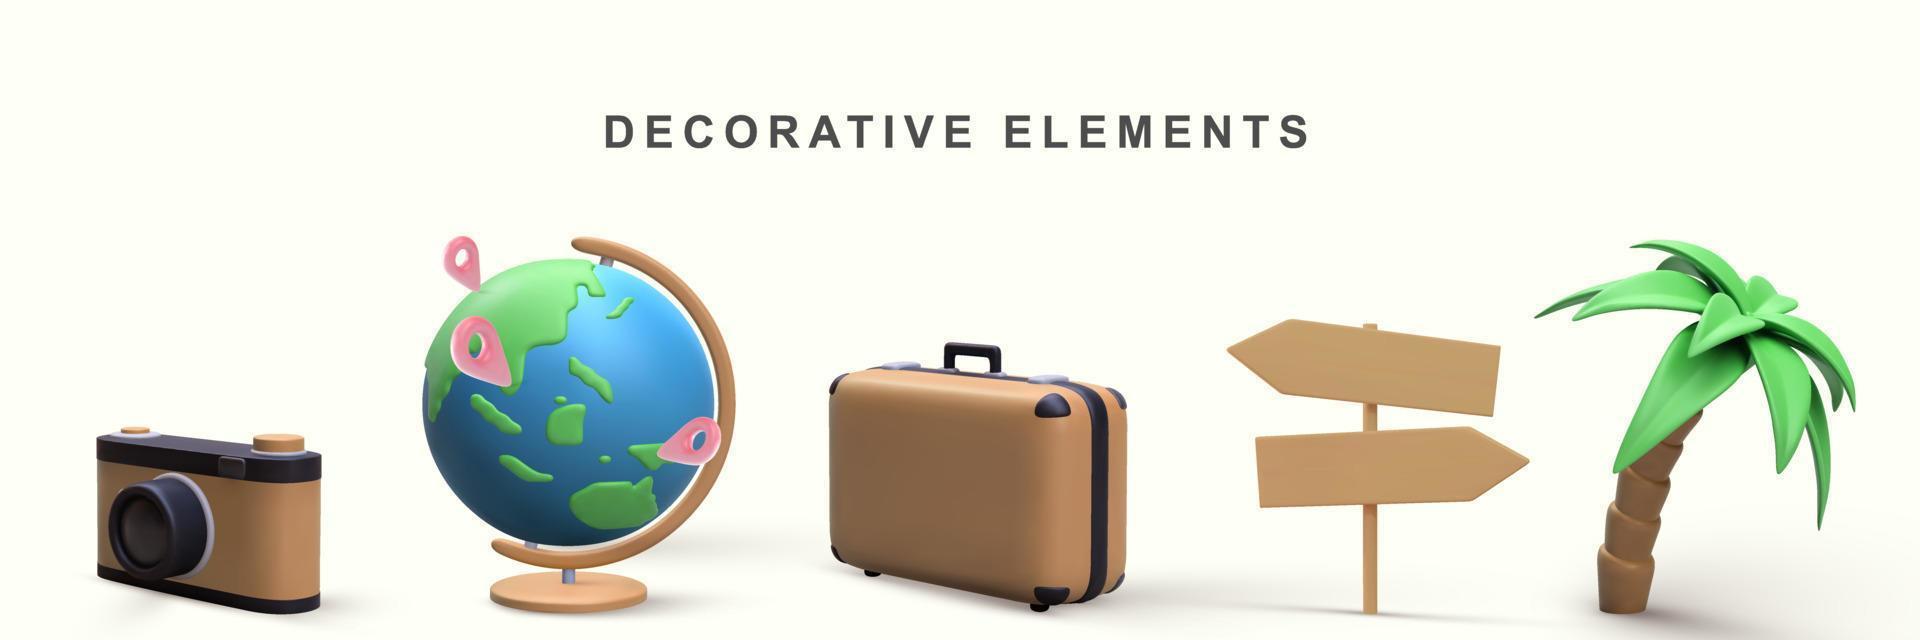 3d realistic set of decorative elements - camera, globe, suitcase, road sign and palm tree. Vector illustration.